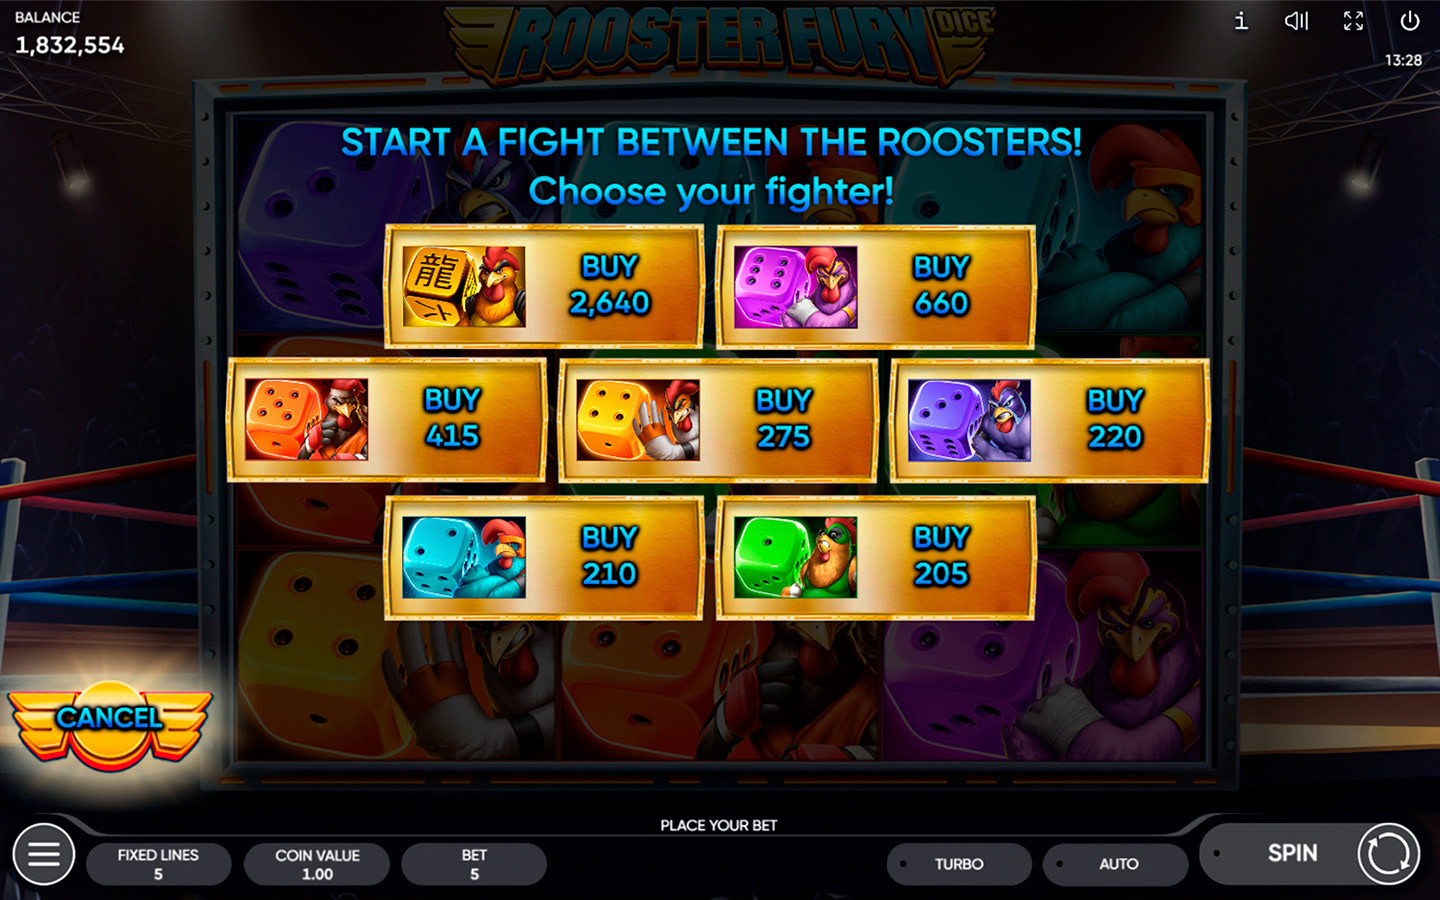 GAMING SOFTWARE PROVIDER | New dice slot game by Endorphina is out!